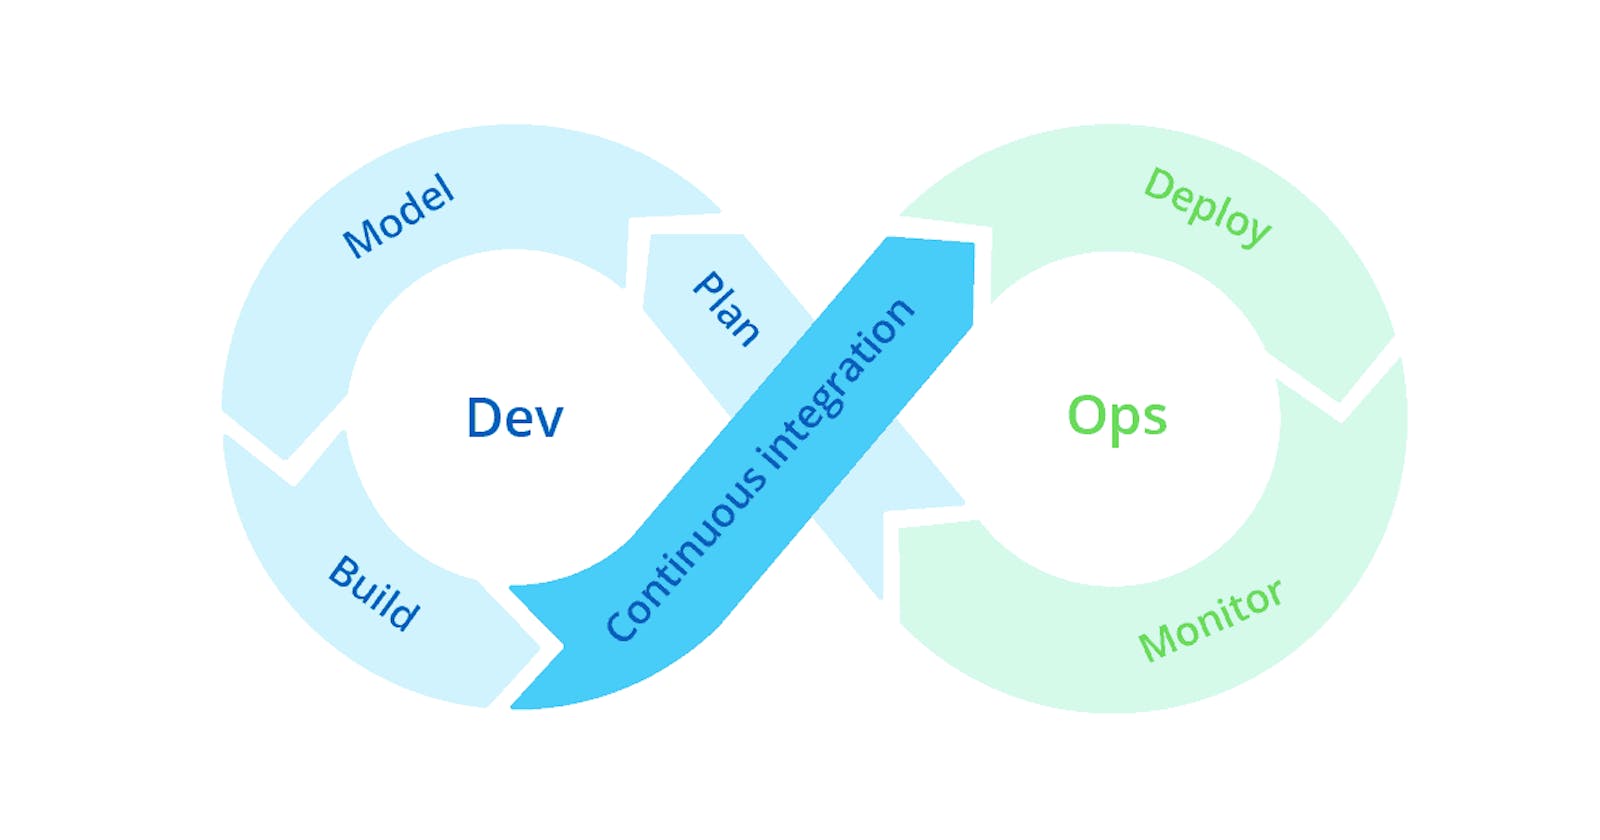 Day 5: The Role of Culture in DevOps